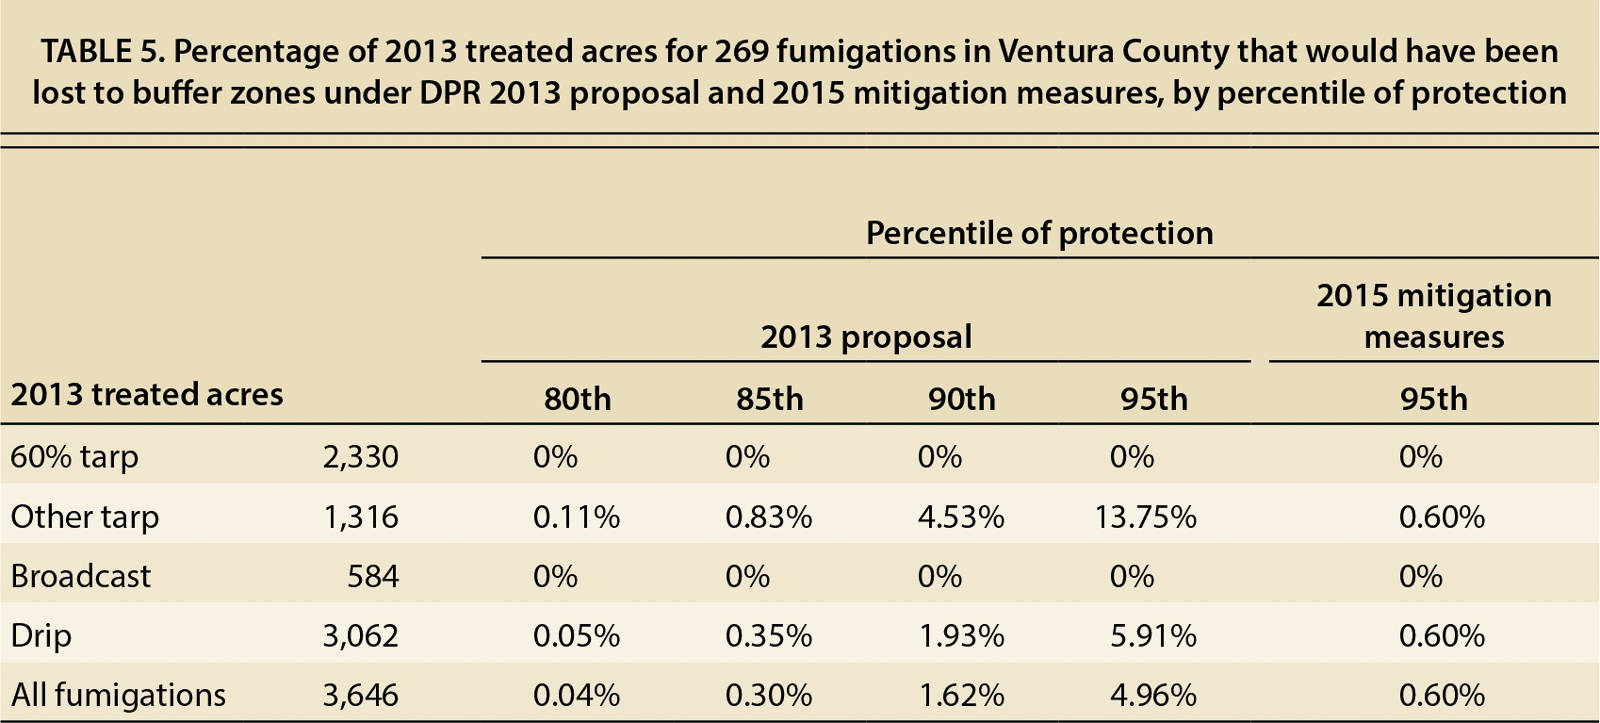 Percentage of 2013 treated acres for 269 fumigations in Ventura County that would have been lost to buffer zones under DPR 2013 proposal and 2015 mitigation measures, by percentile of protection